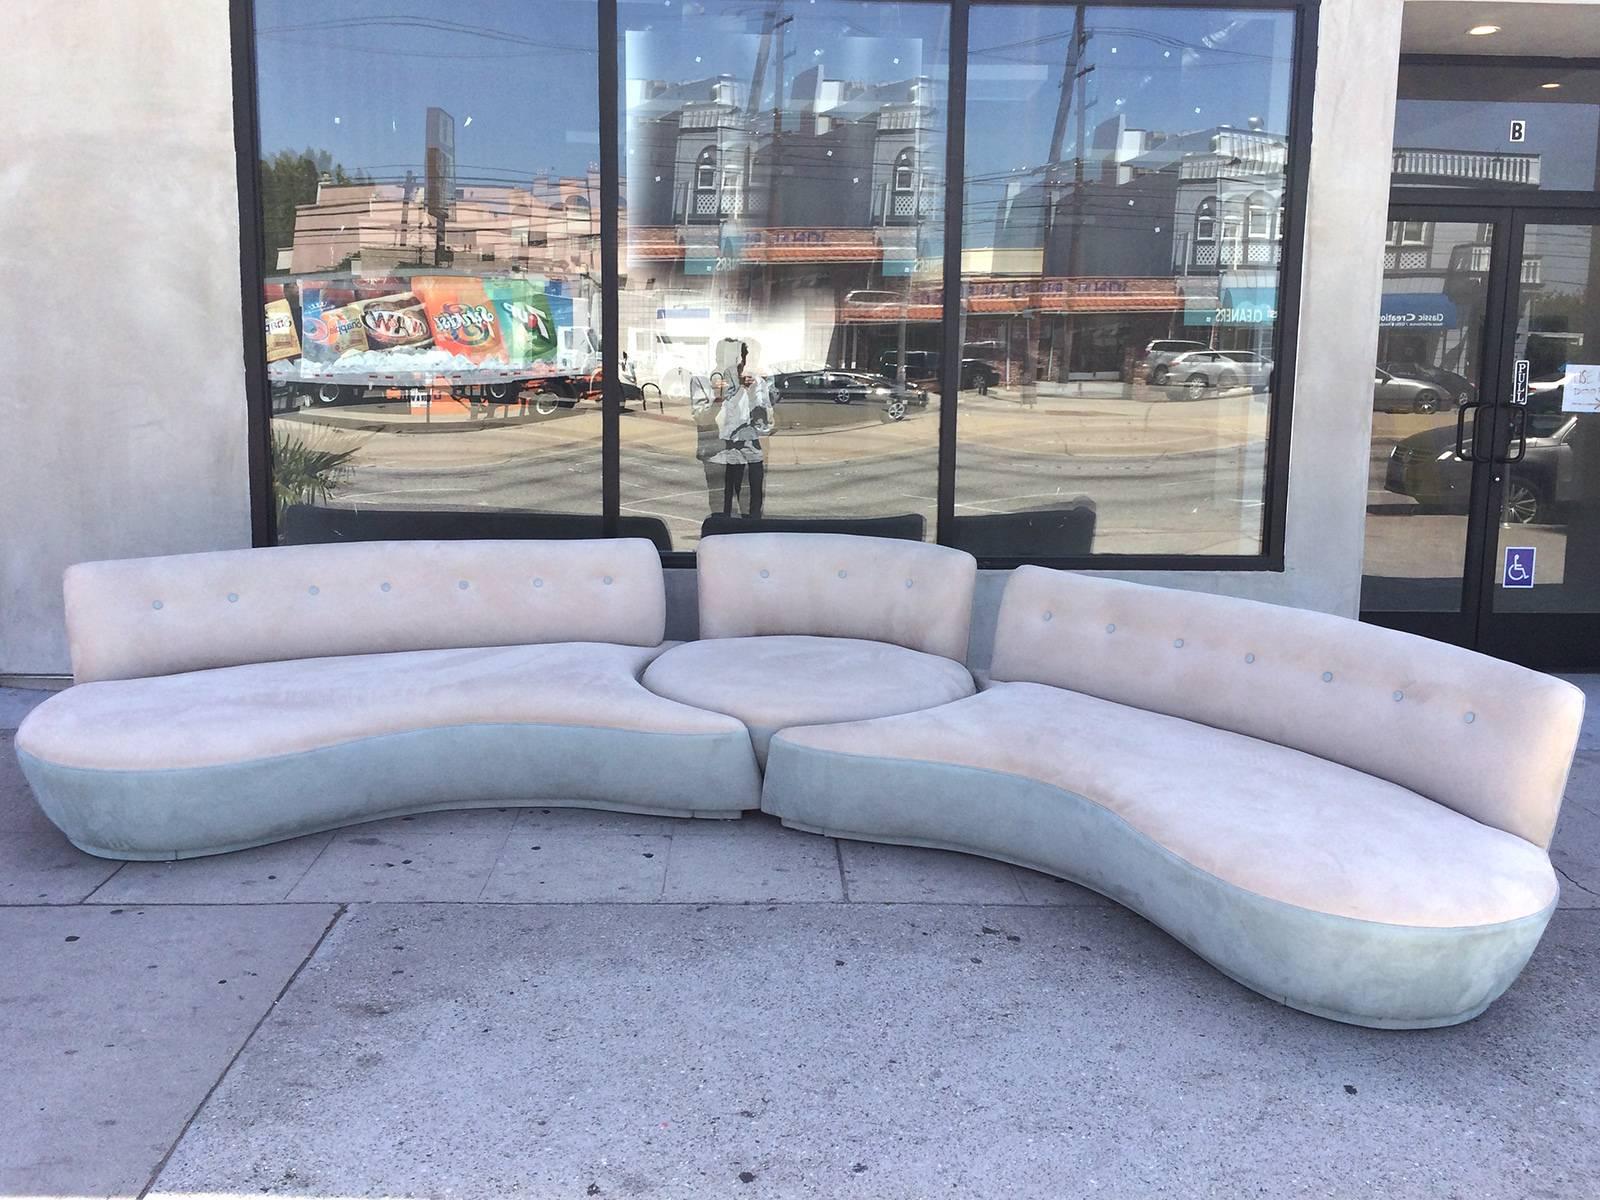 Four-piece sectional sofa with swivel chairs in off-white and light grey-blue suede. Use it as two separate two-piece sections or as a single swivel chair and a three-piece section. Provenance of this set it unknown but very similar in style to